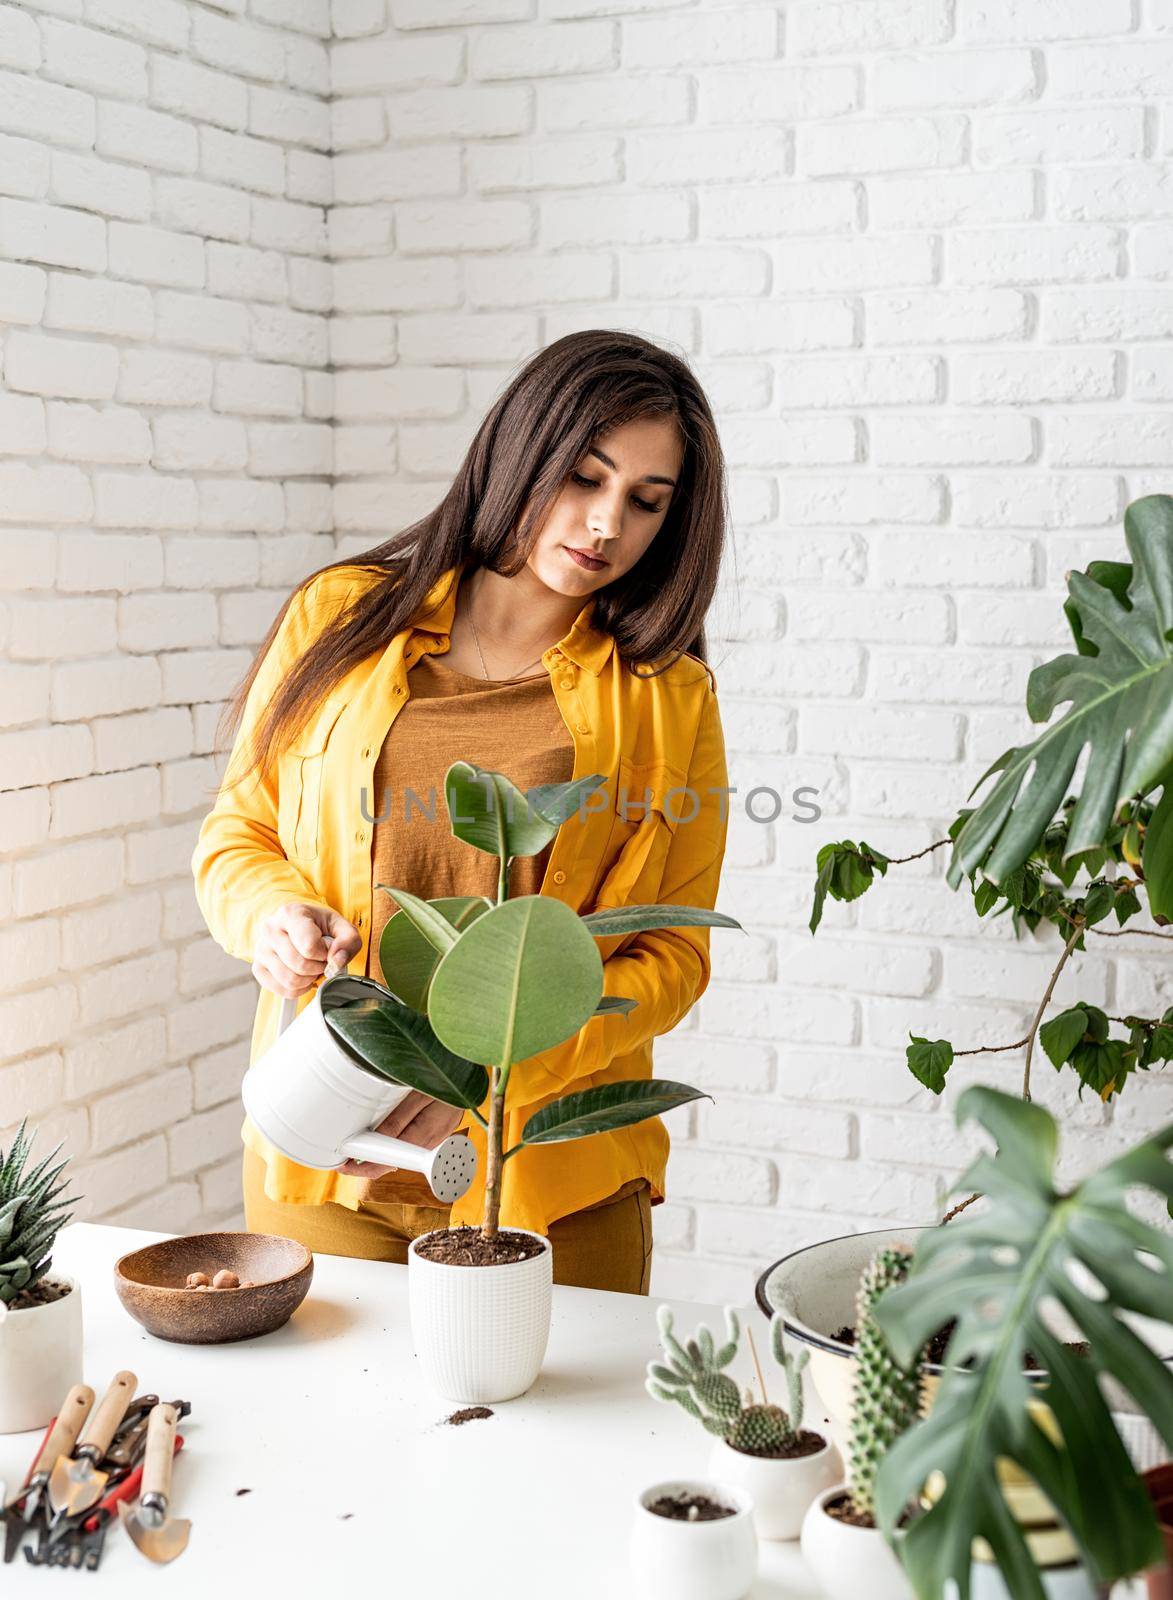 Home gardening. Female gardener in yellow clothestaking care of the plants transplanting a young ficus plant into a new flowerpot